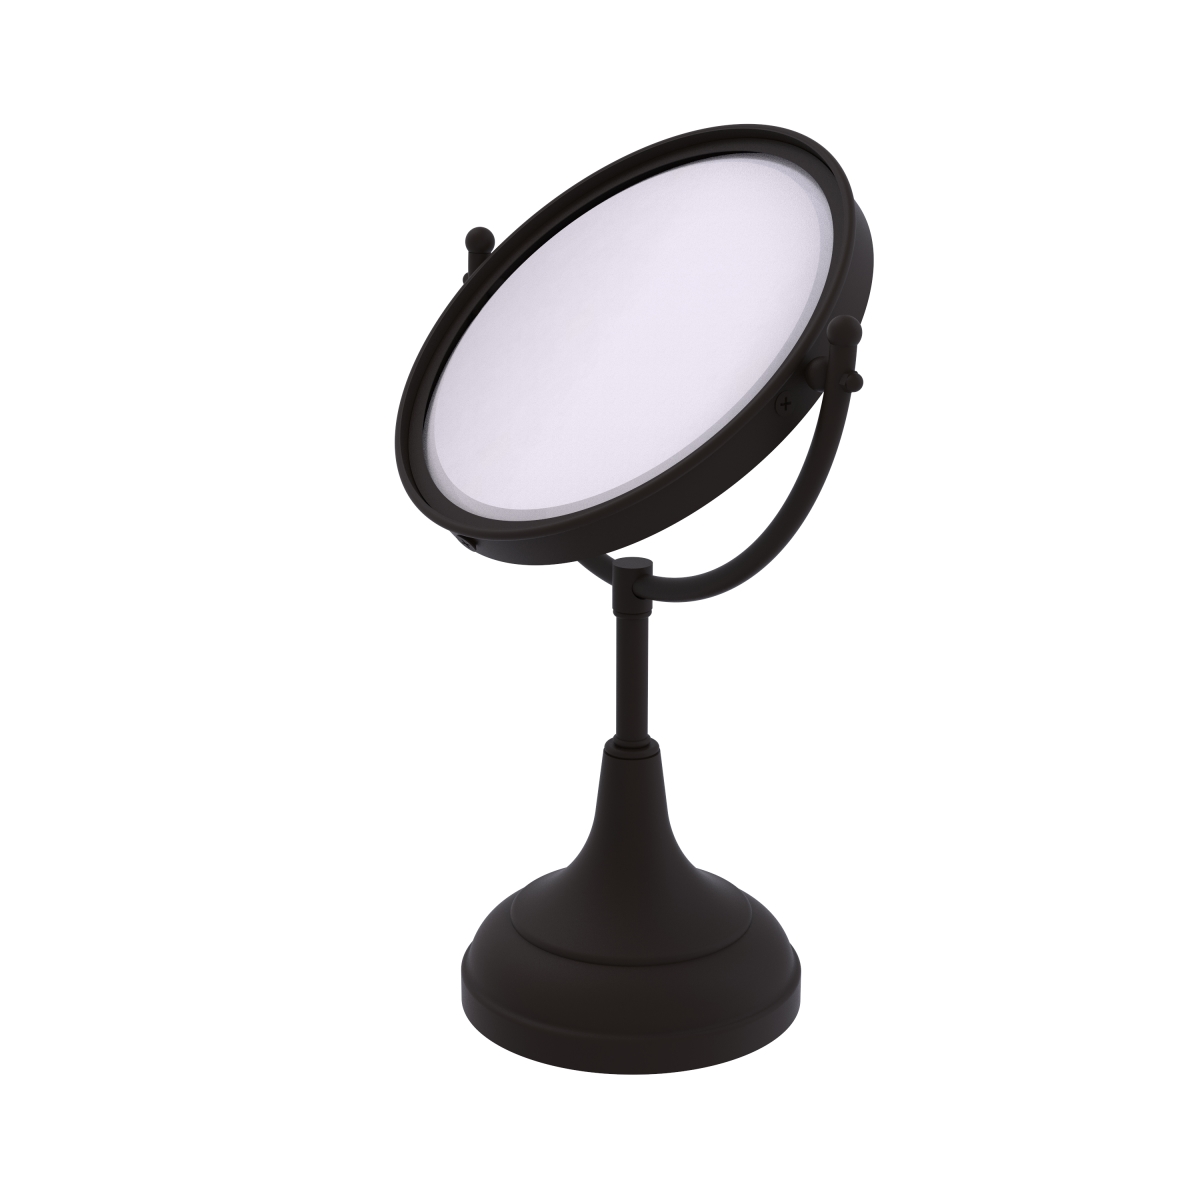 Dm-2-2x-orb Dotted Ring Style 8 In. Vanity Top Make-up Mirror 2x Magnification, Oil Rubbed Bronze